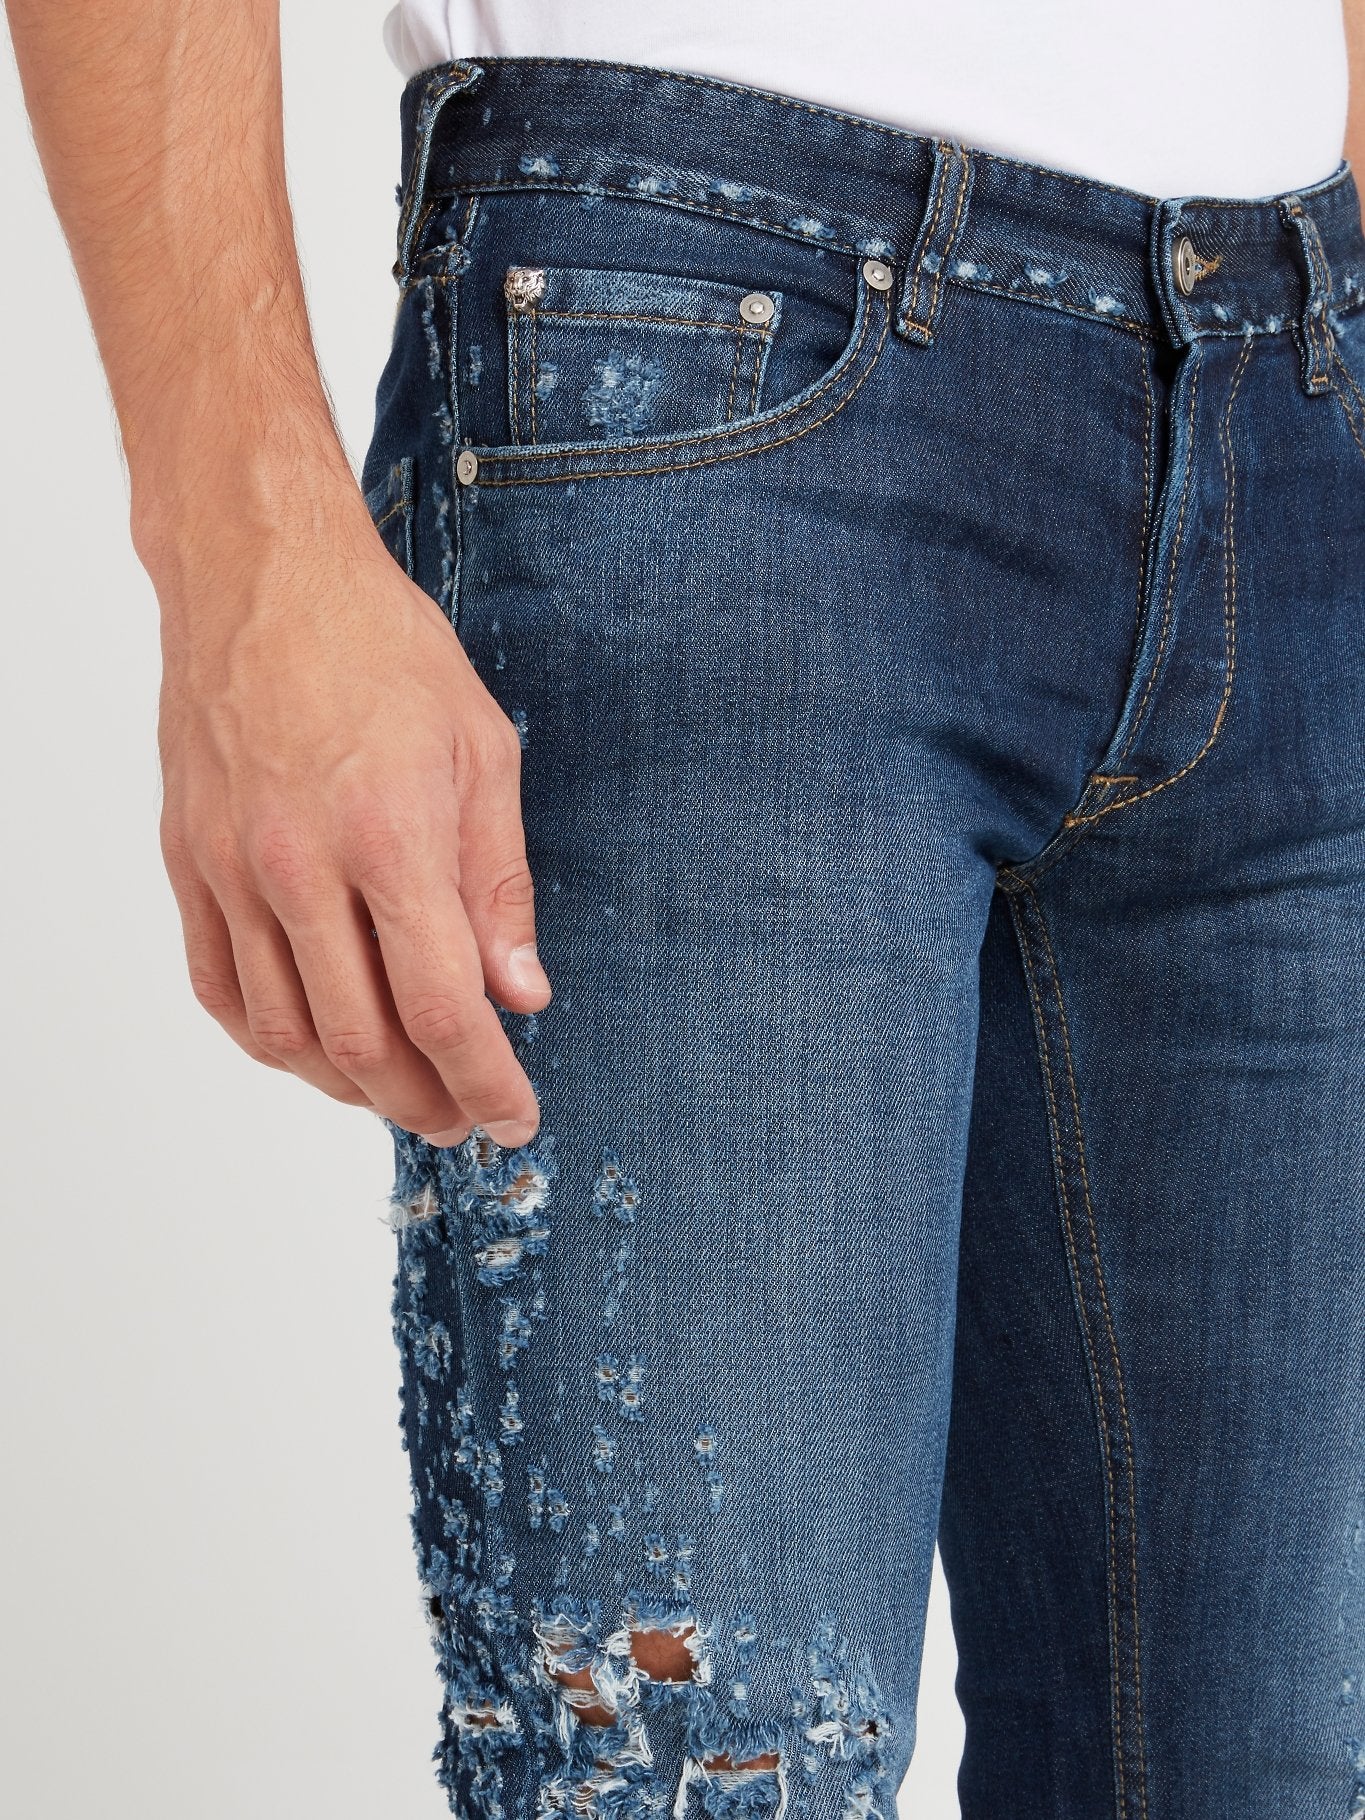 Blue Wash Distressed Jeans